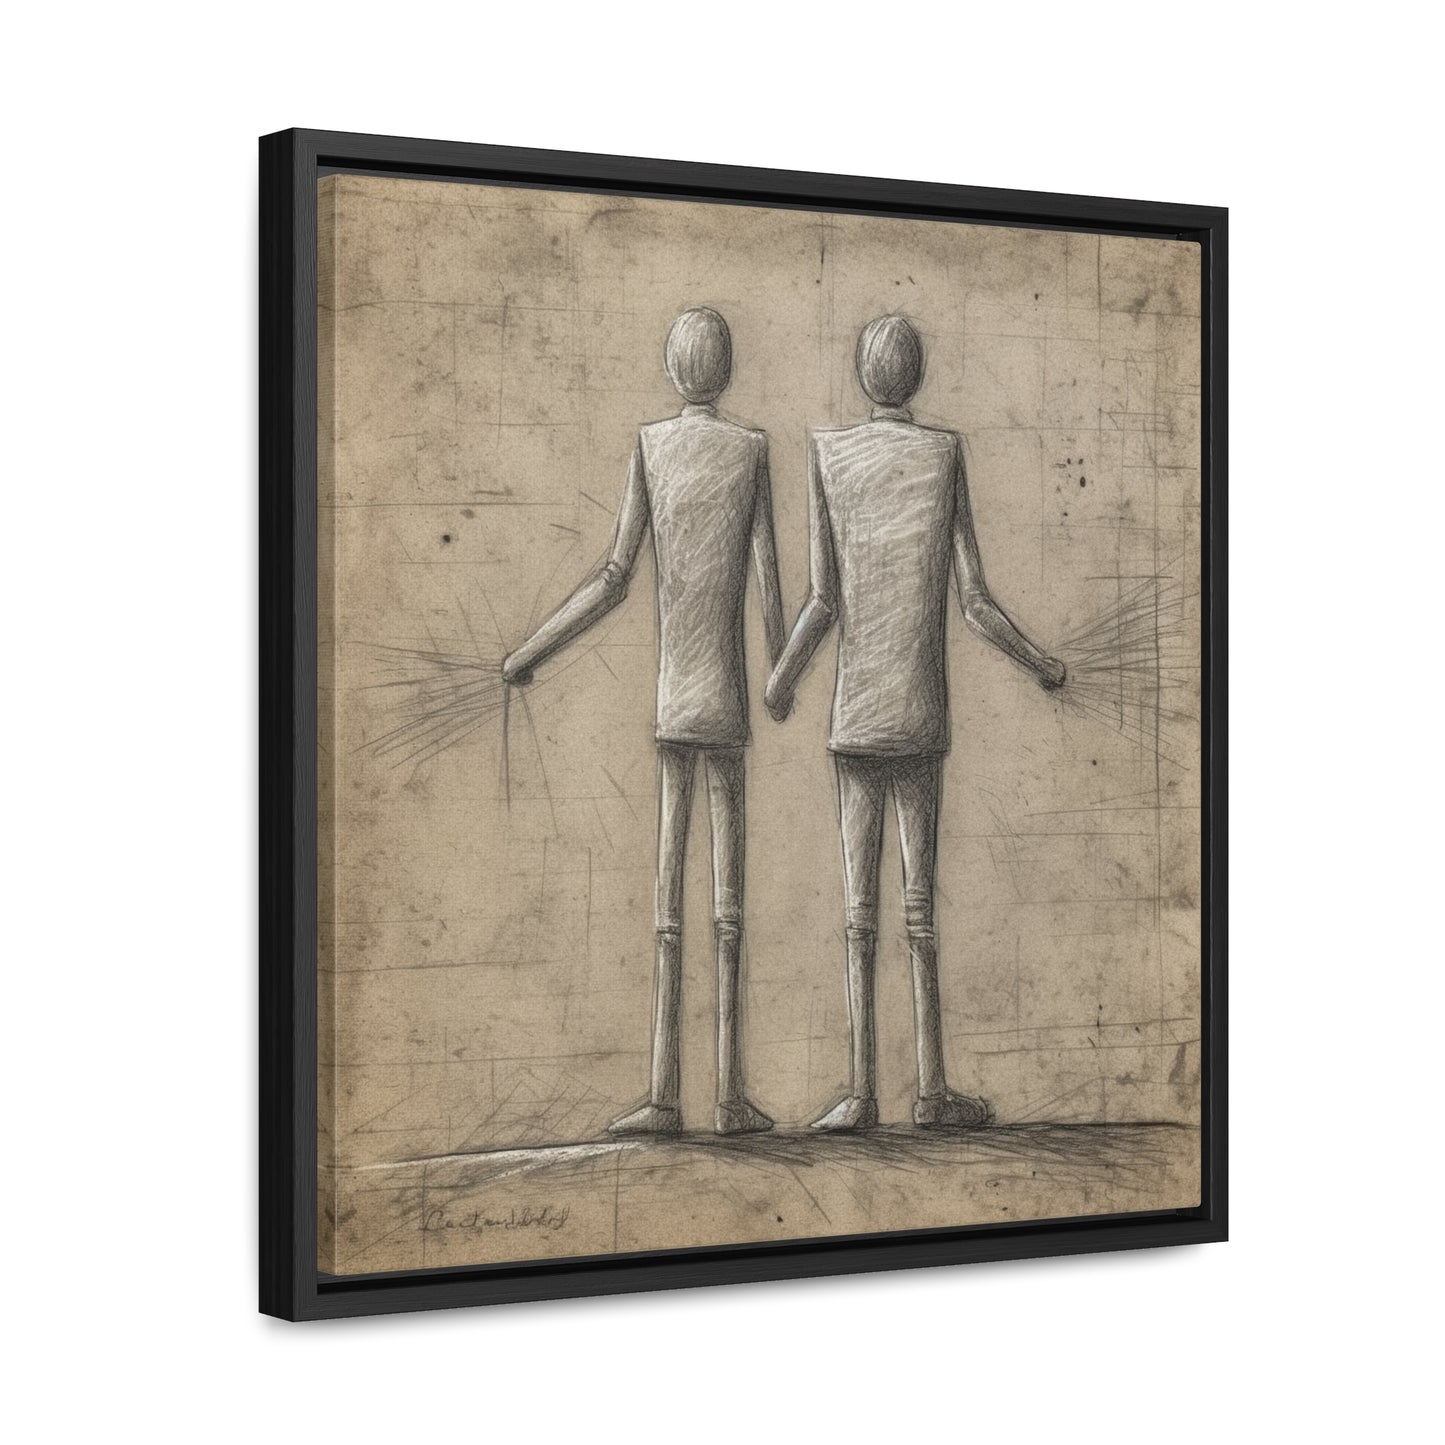 The Courage of Vulnerability 9, Valentinii, Gallery Canvas Wraps, Square Frame